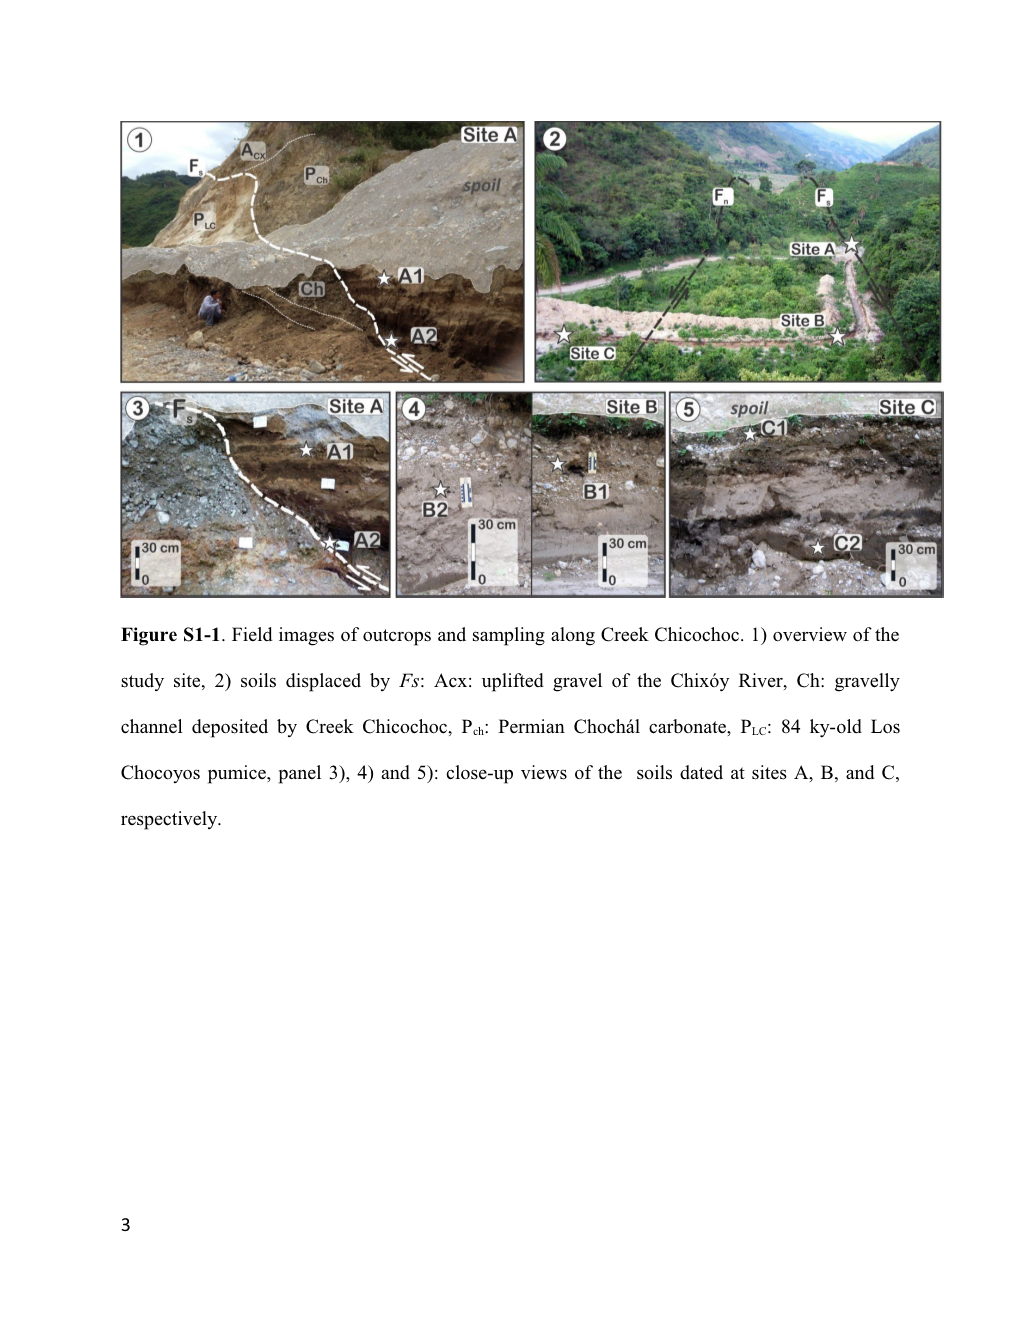 Guatemala Paleoseismicity: from Late Classic Maya Collapse to Recent Fault Creep